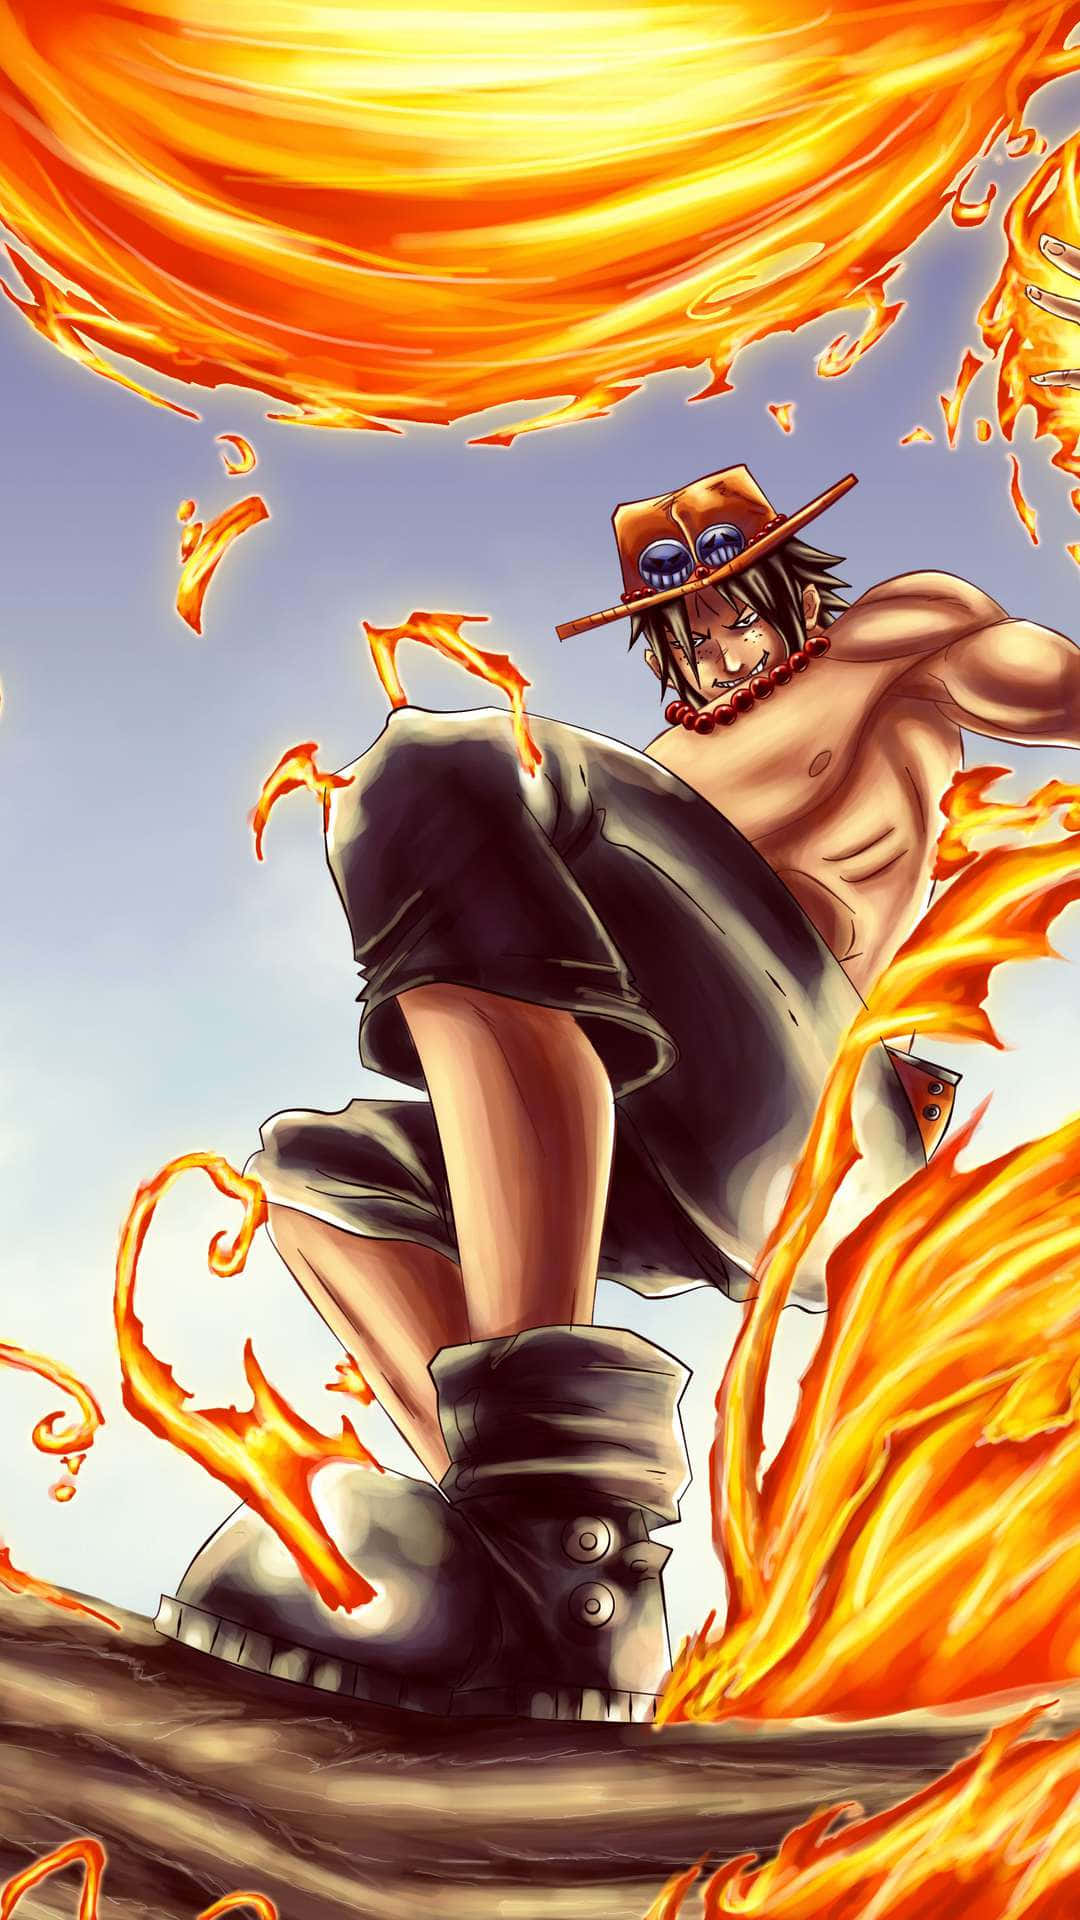 Portgas D Ace from One Piece as he unleashes a powerful attack Wallpaper